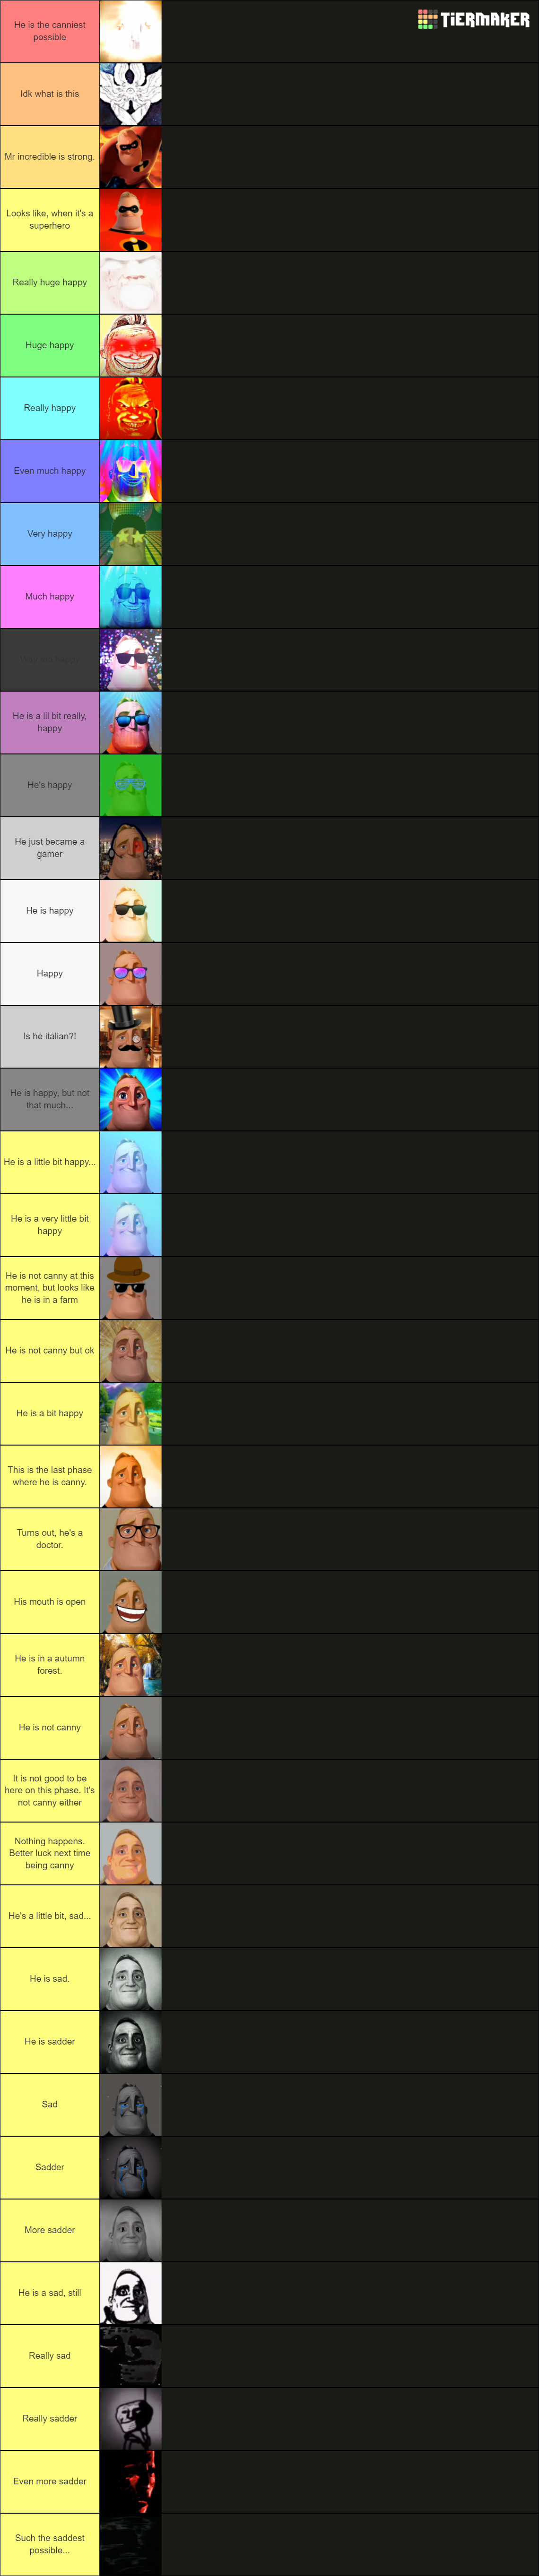 mr incredible becoming uncanny mega extended Tier List (Community